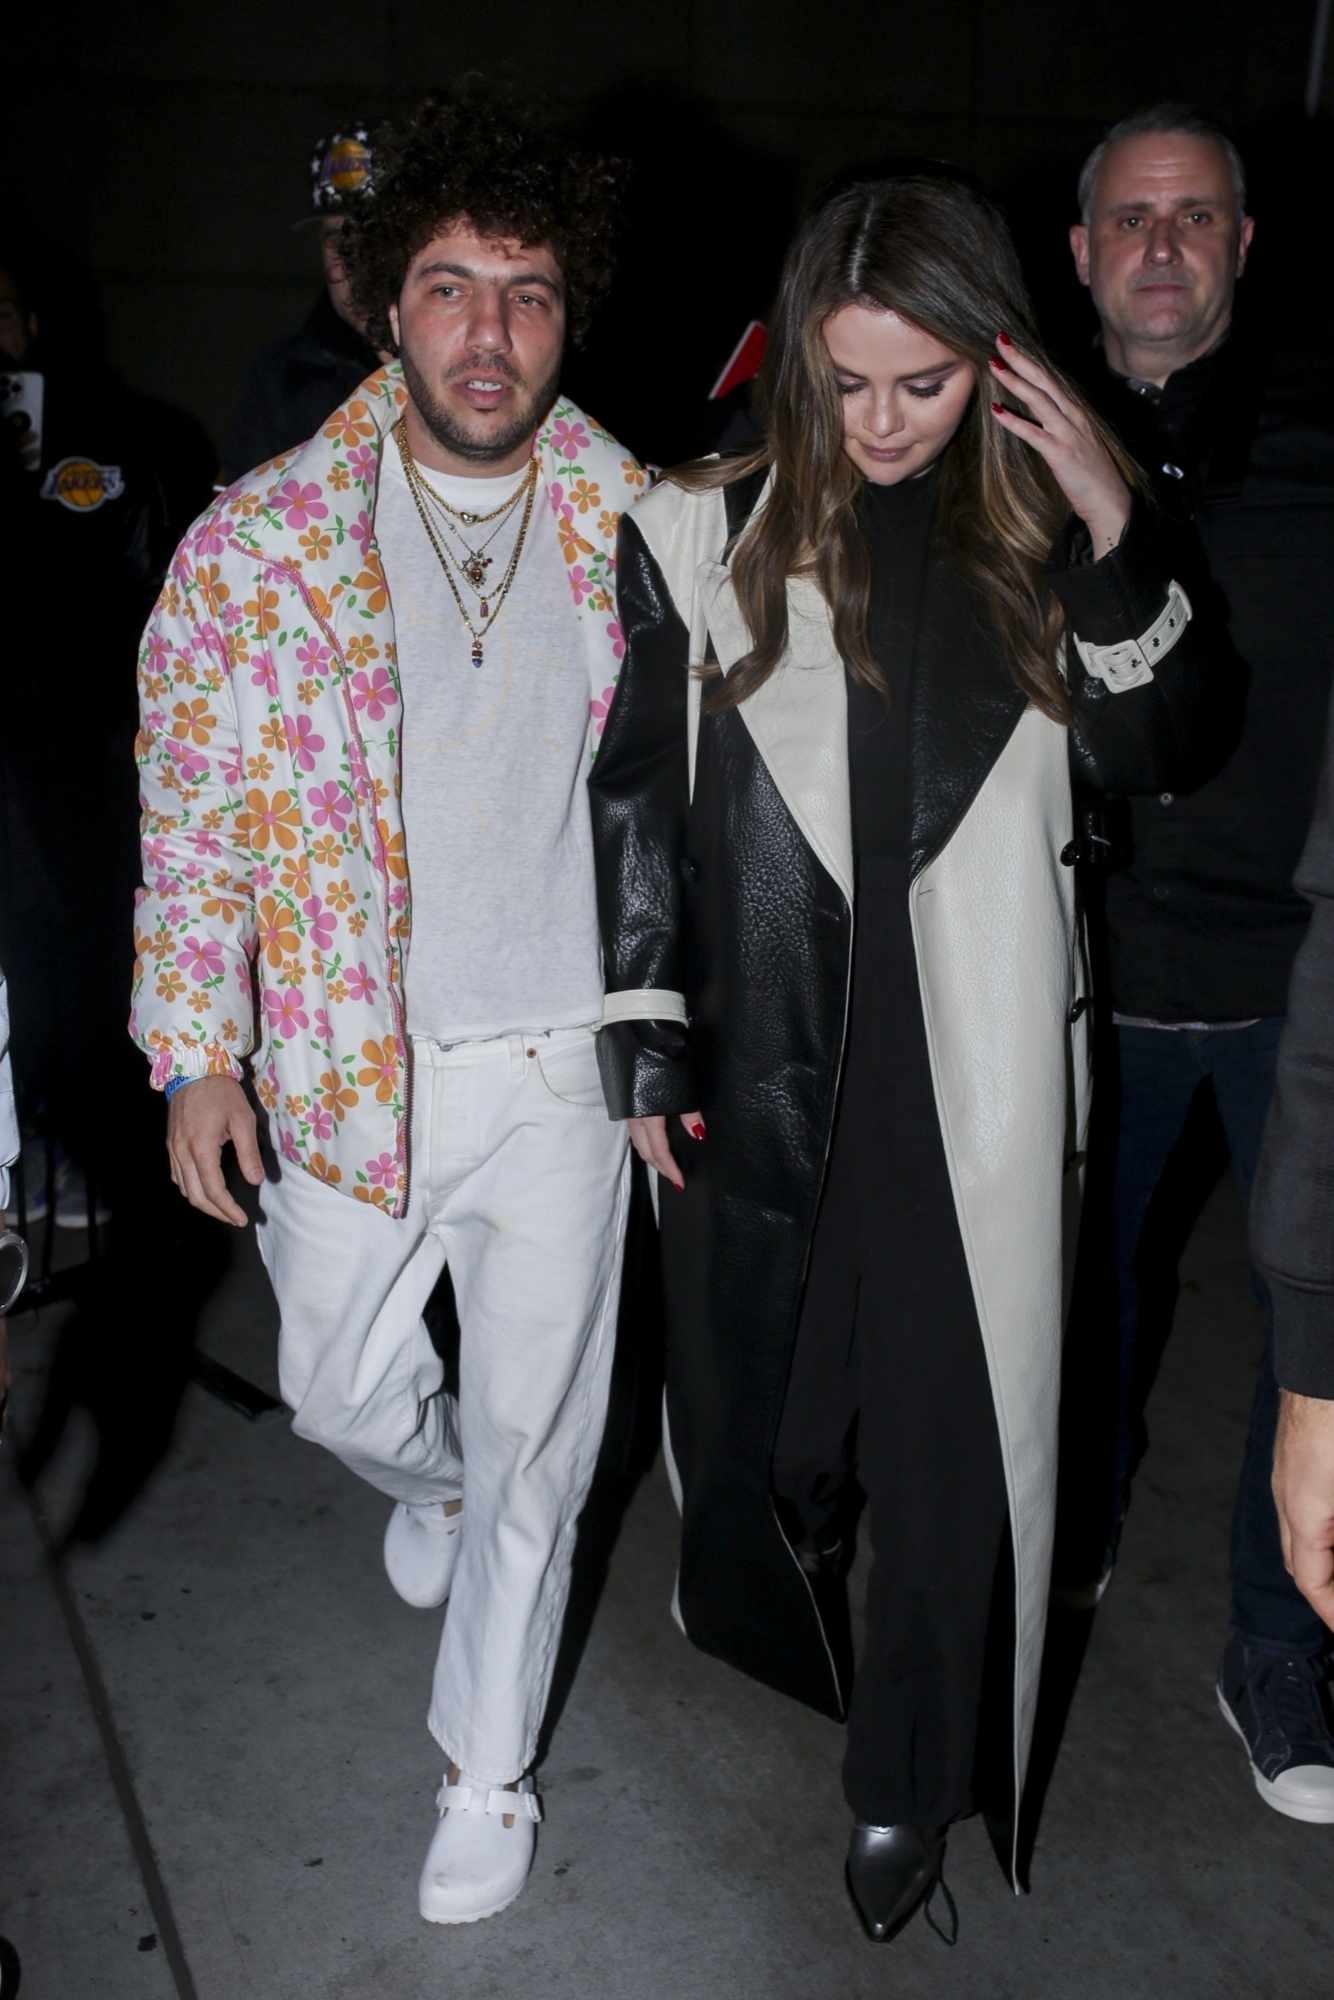 Benny Blanco wearing a floral puffer jacket with girlfriend Selena Gomez wearing a black coat